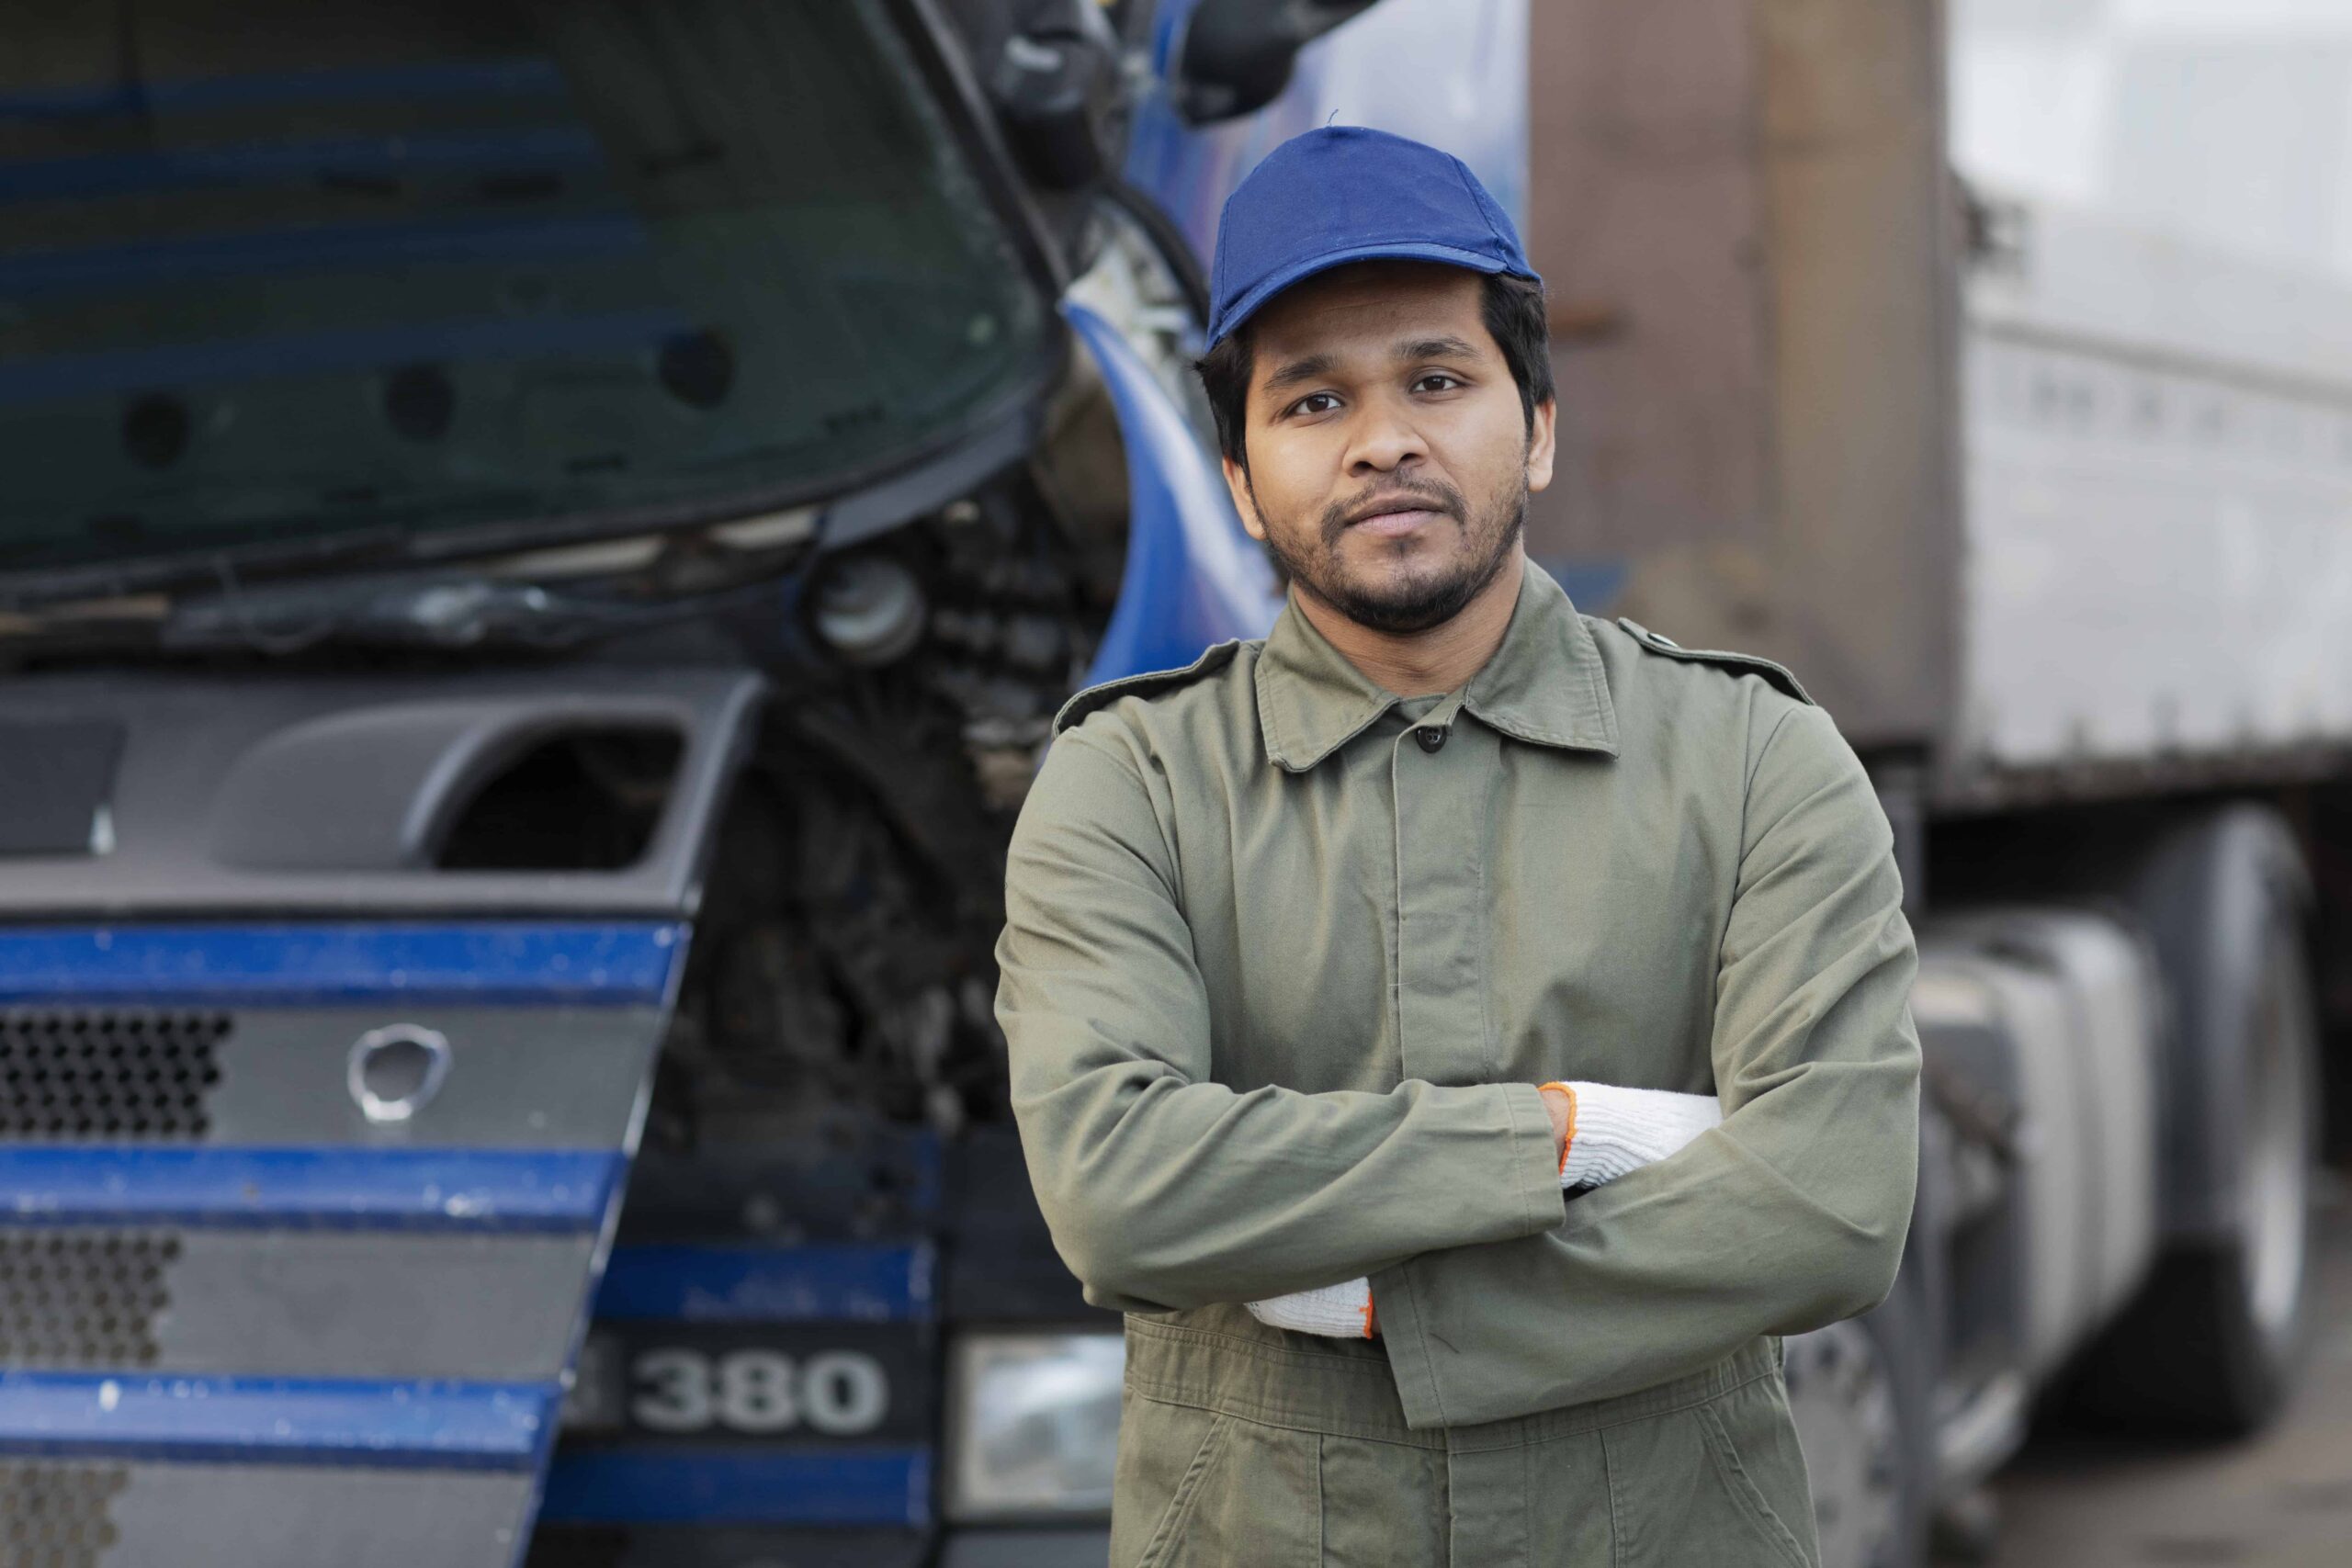 Truck Driver in front of a truck with arms crossed